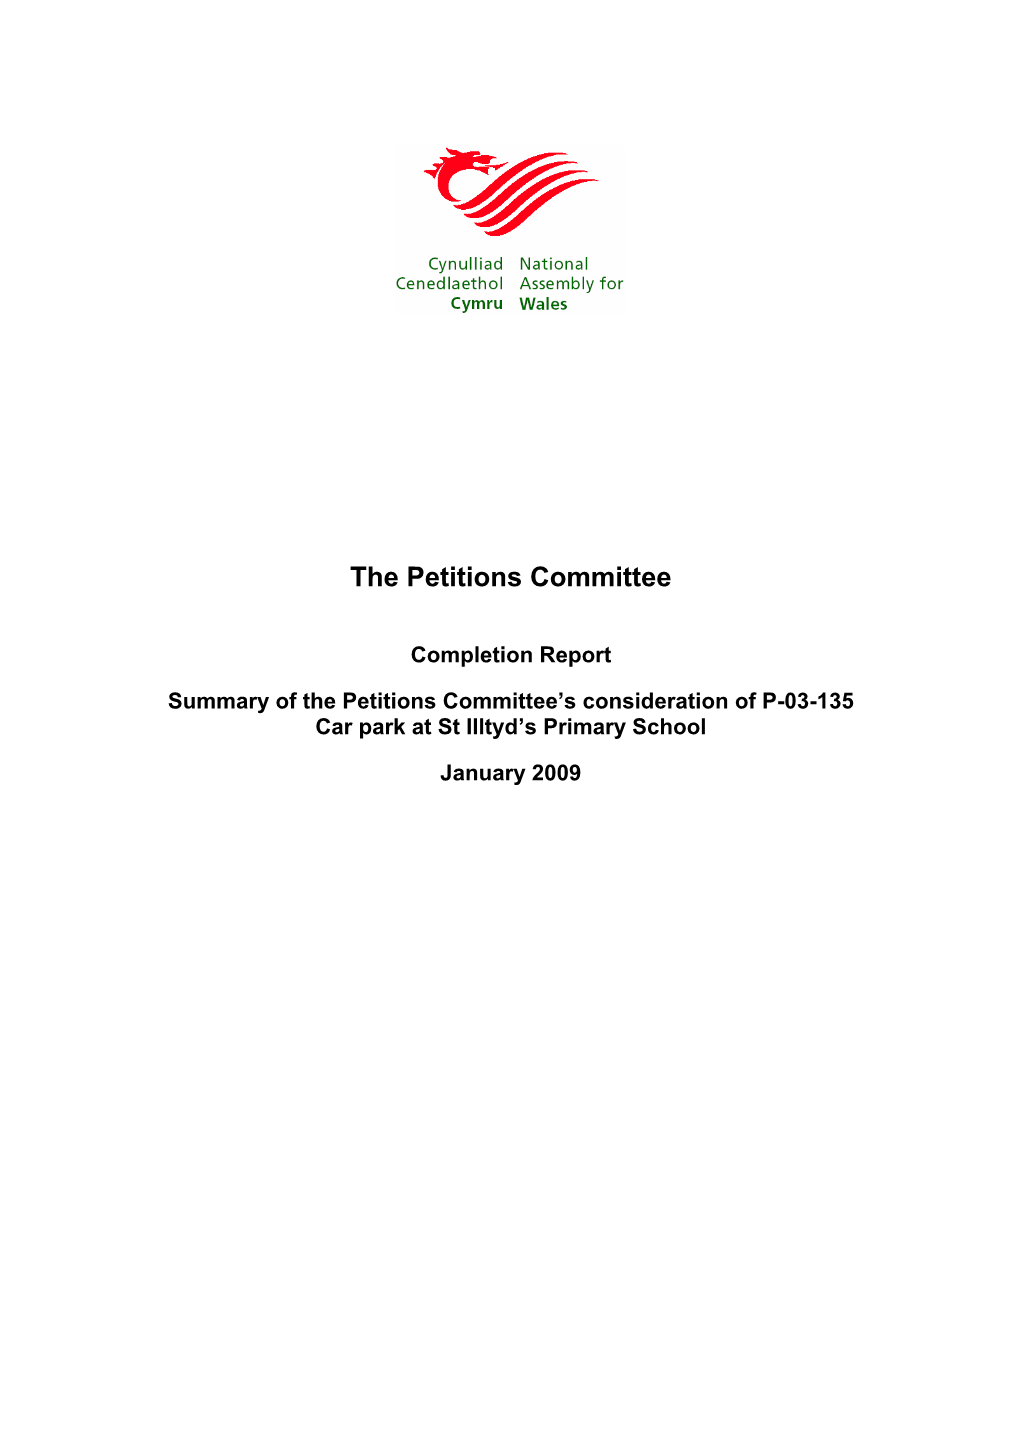 The Petitions Committee